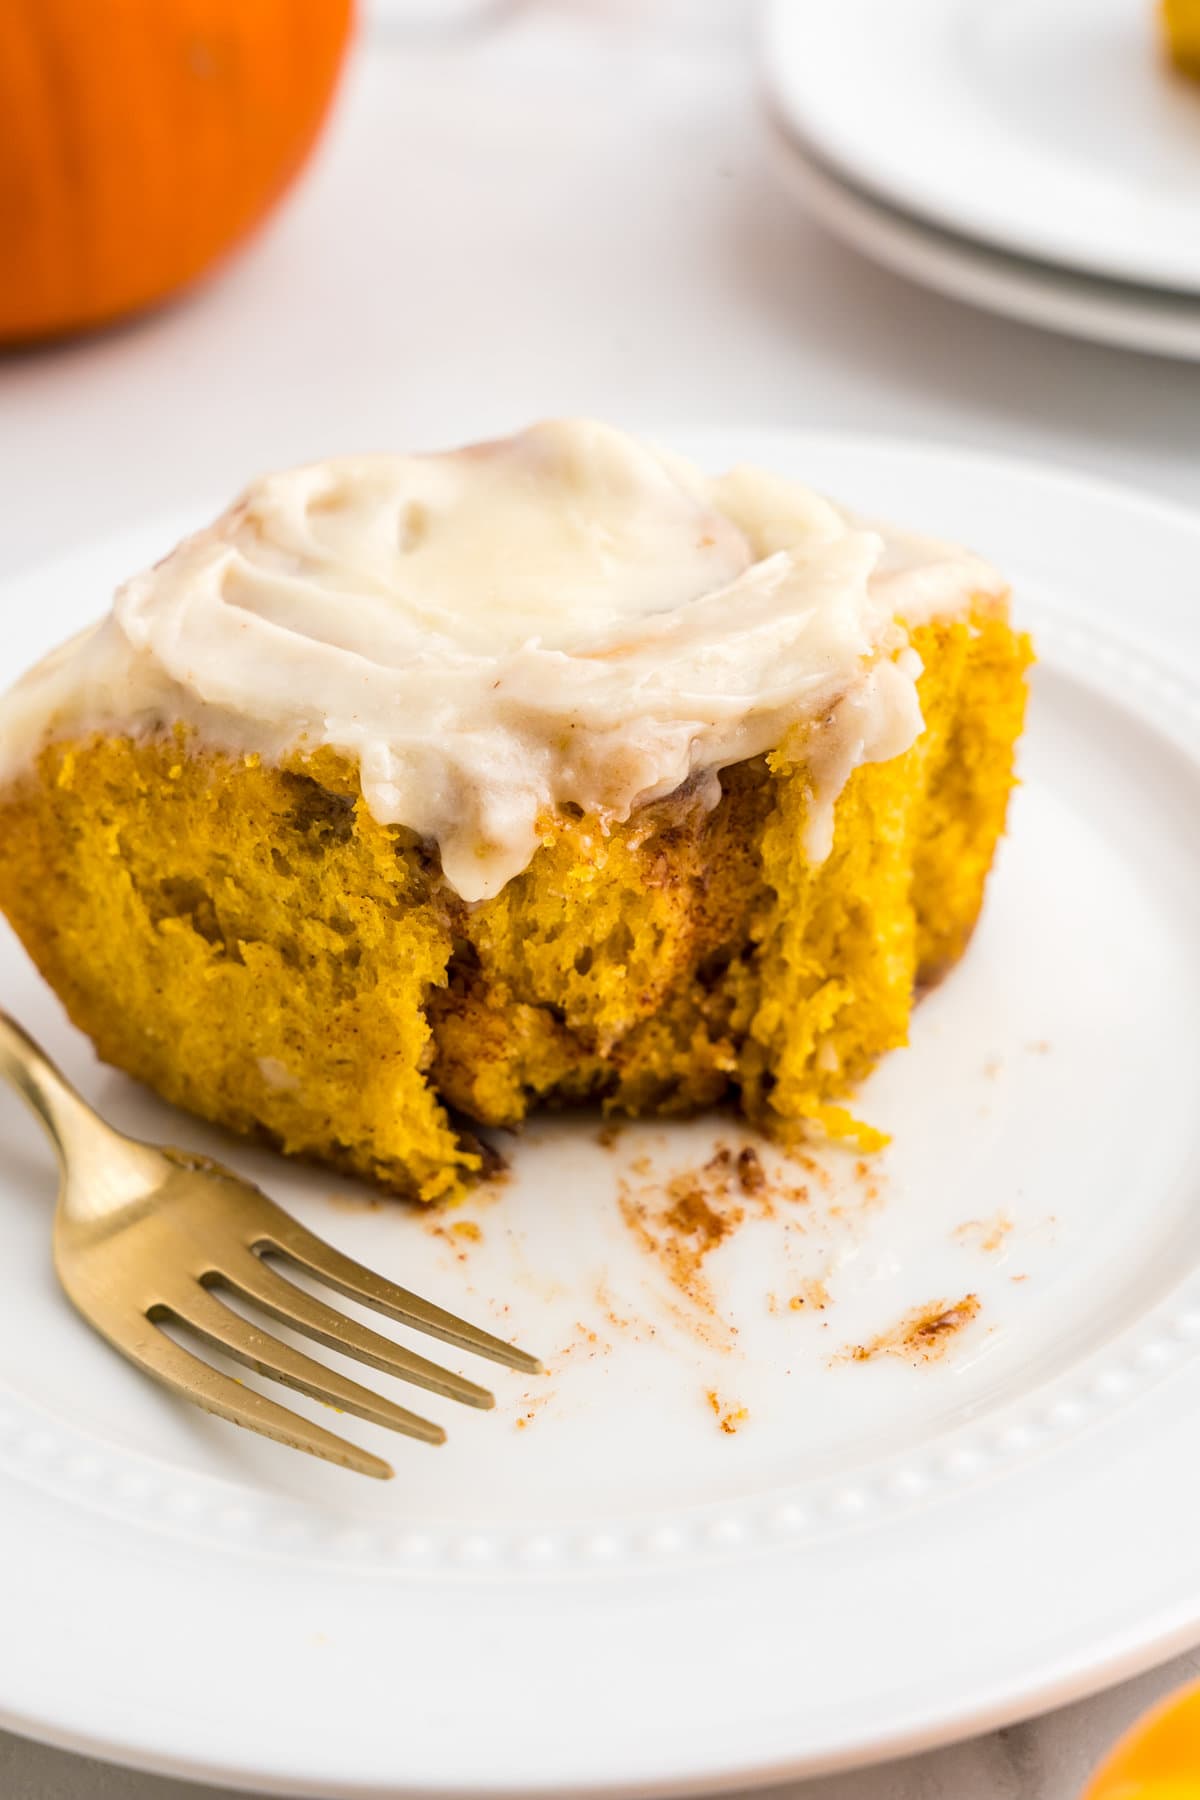 Pumpkin Cinnamon Roll on plate with one bite taken and a fork set aside